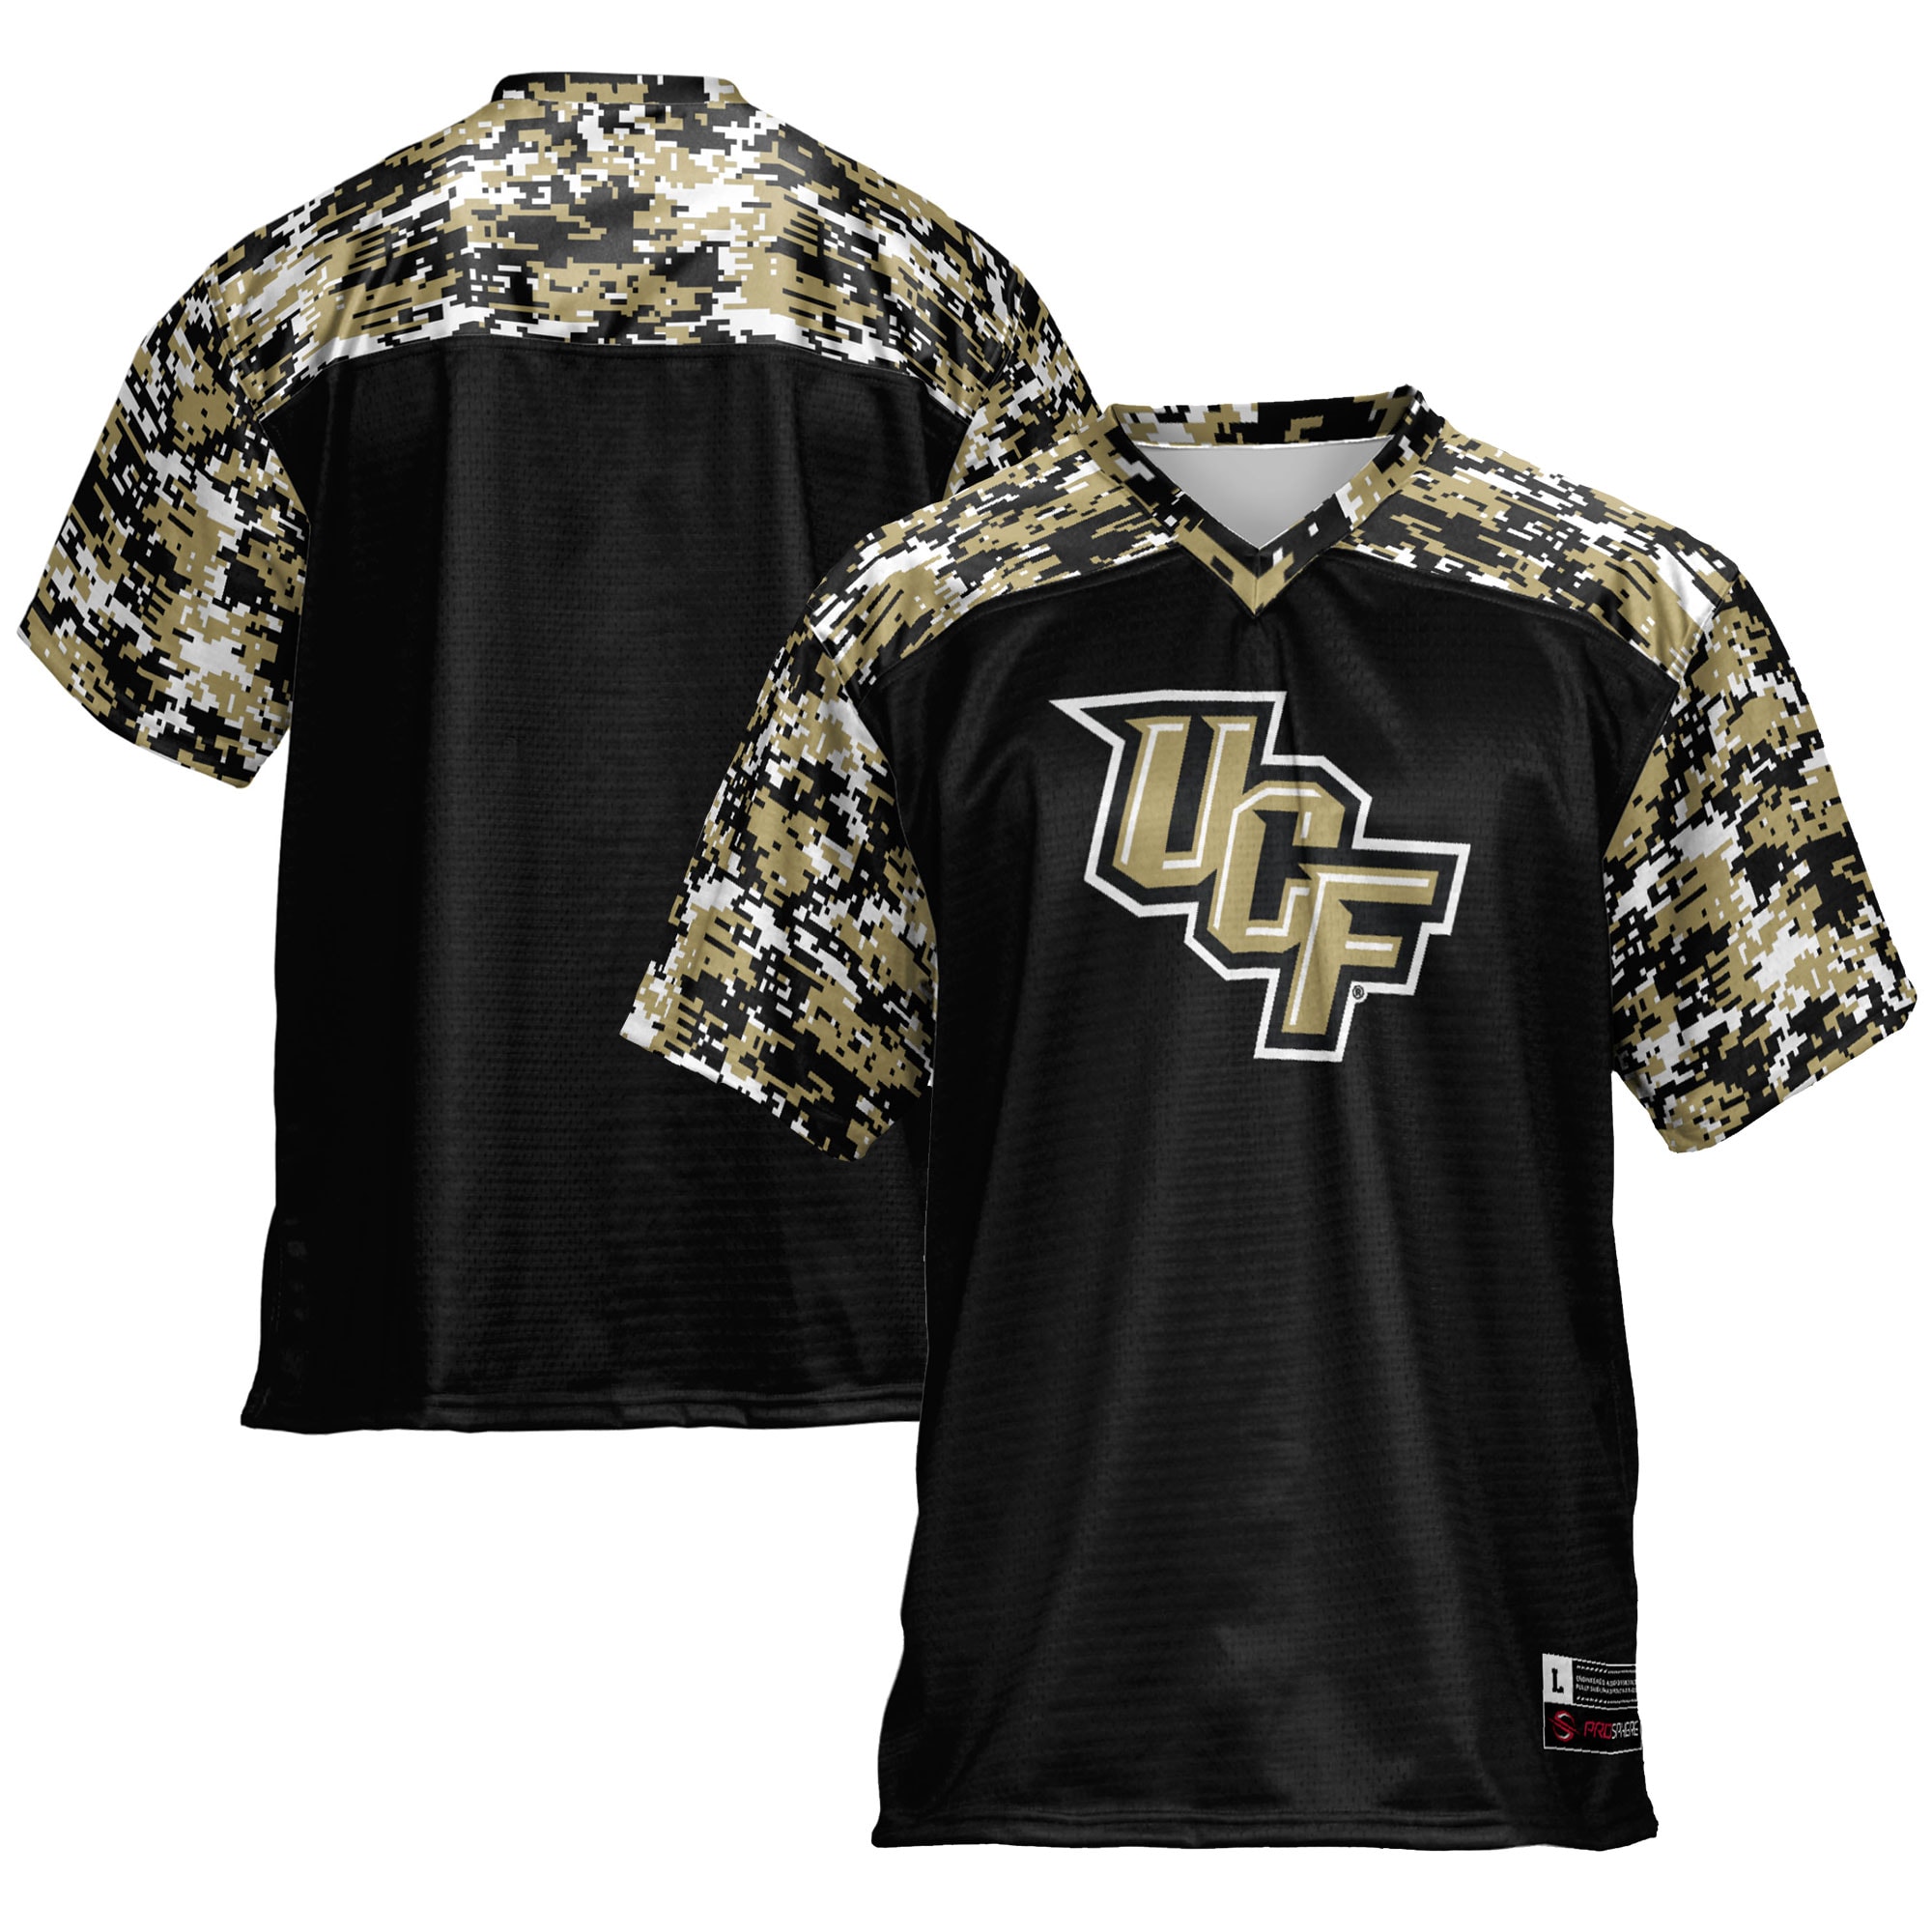 Ucf Knights  Football Shirts Jersey - Black For Youth Women Men